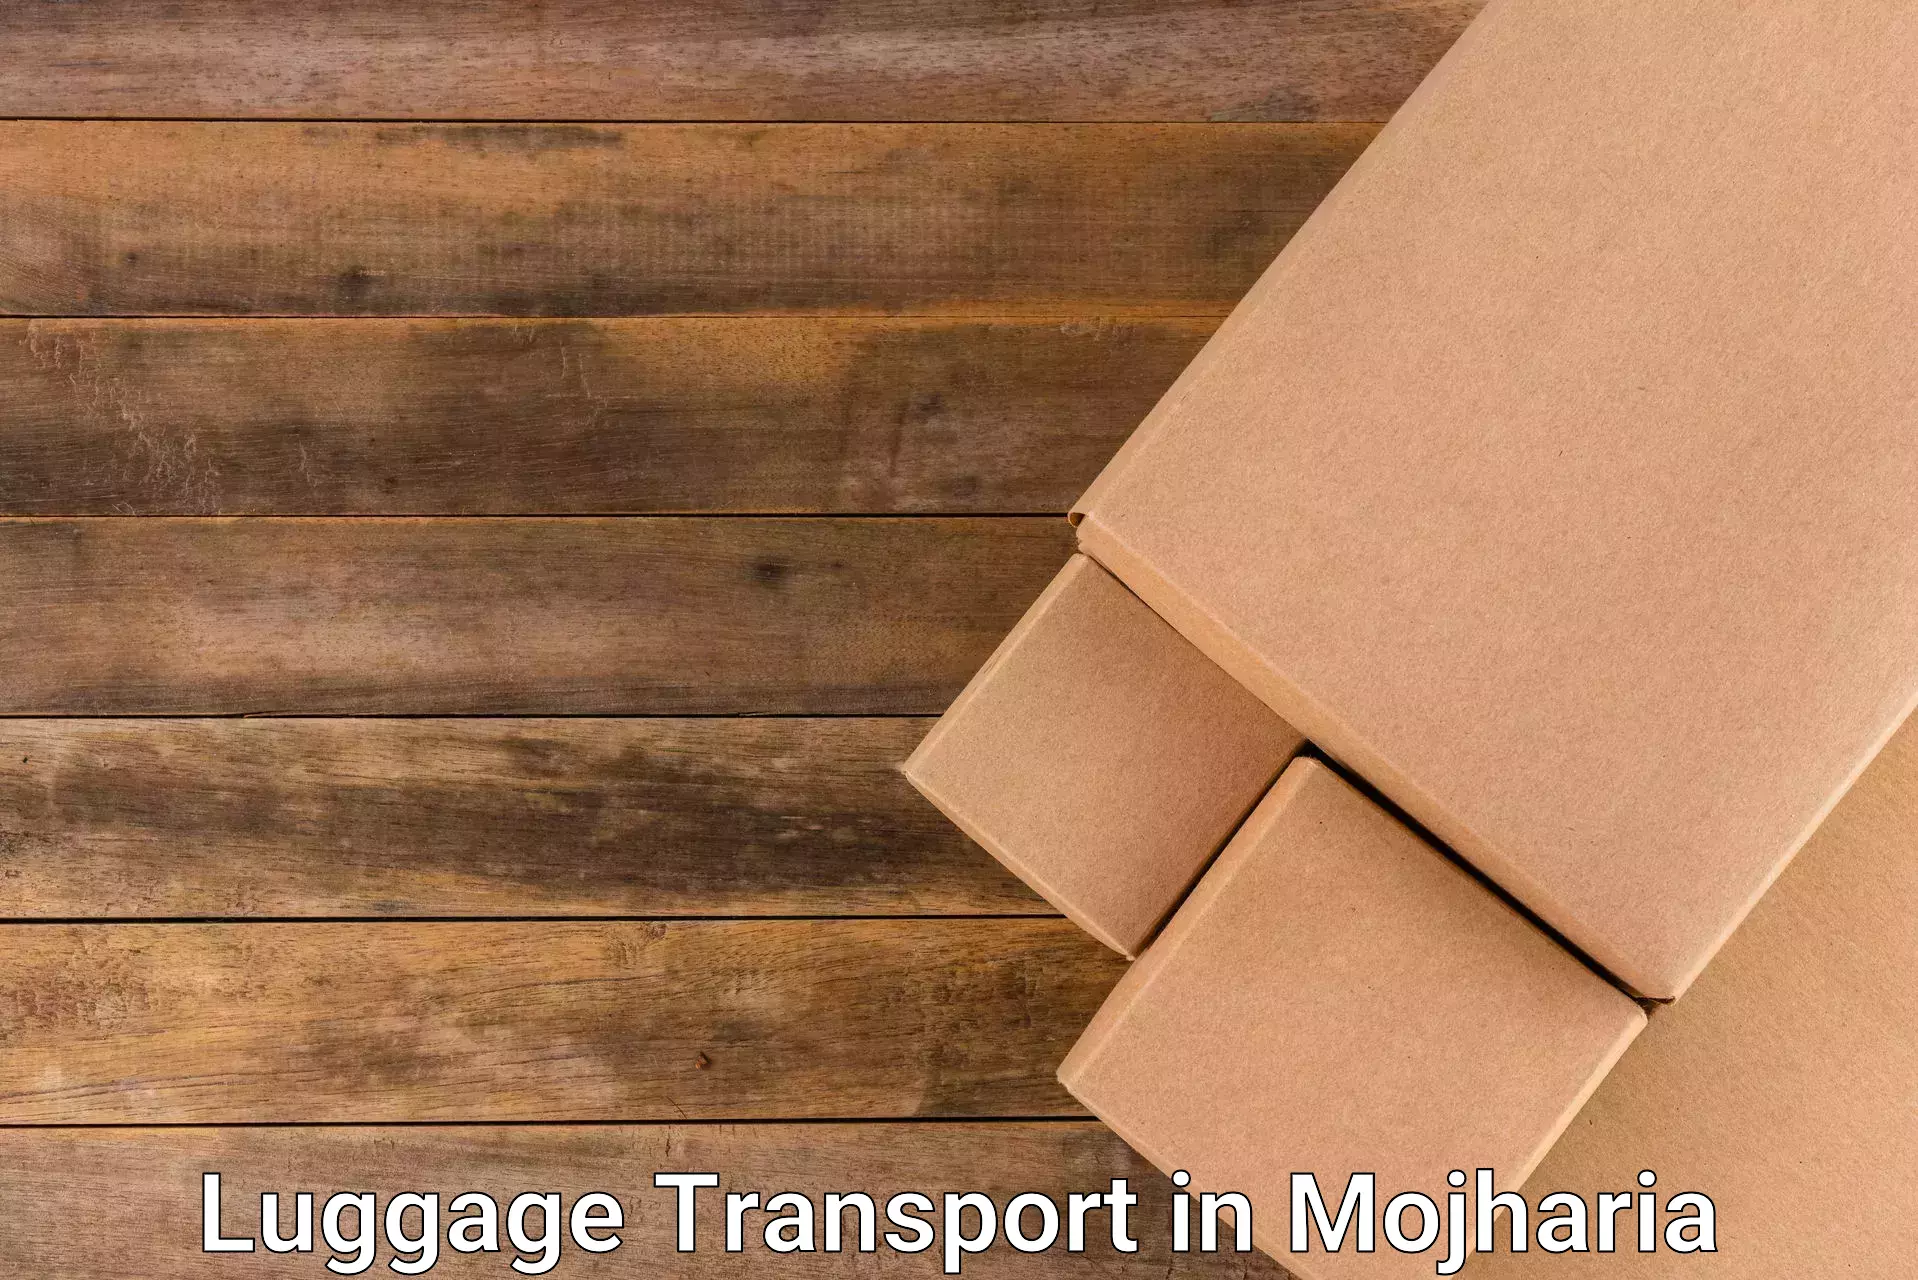 Express luggage delivery in Mojharia